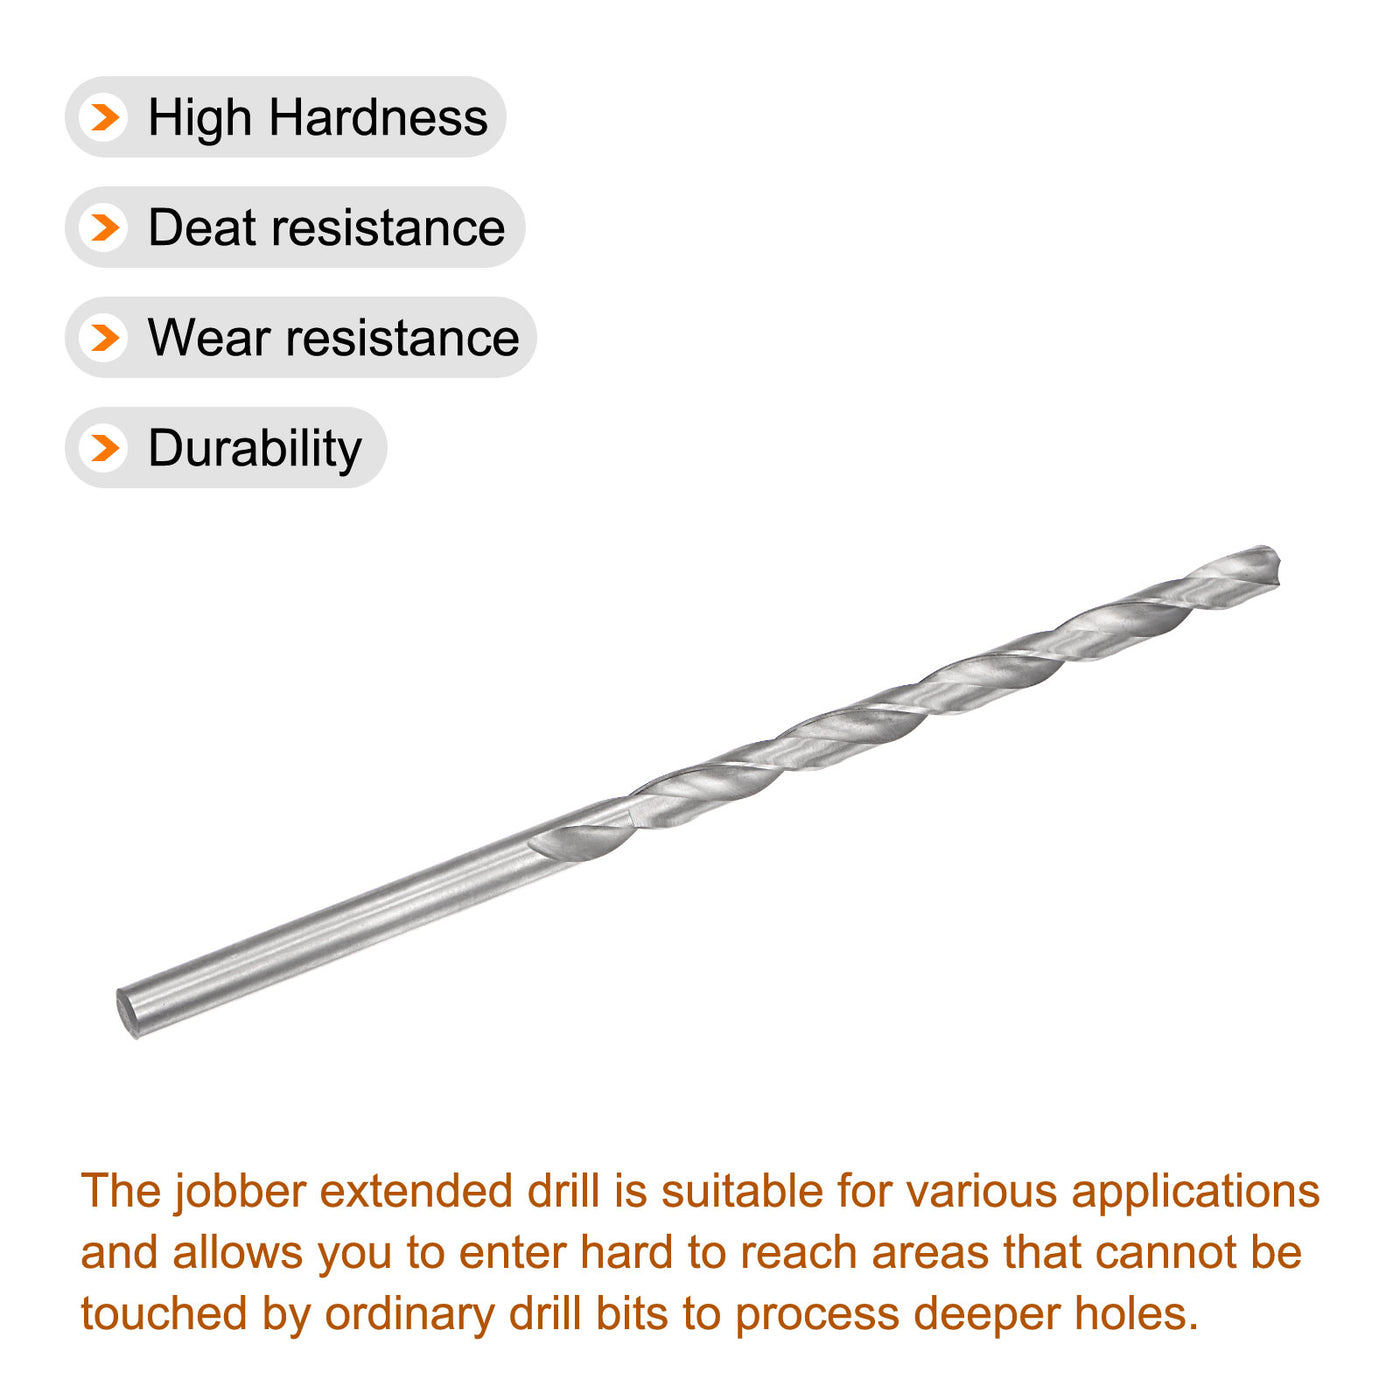 uxcell Uxcell 12mm Twist Drill Bits, High-Speed Steel Extra Long Drill Bit 304mm Length